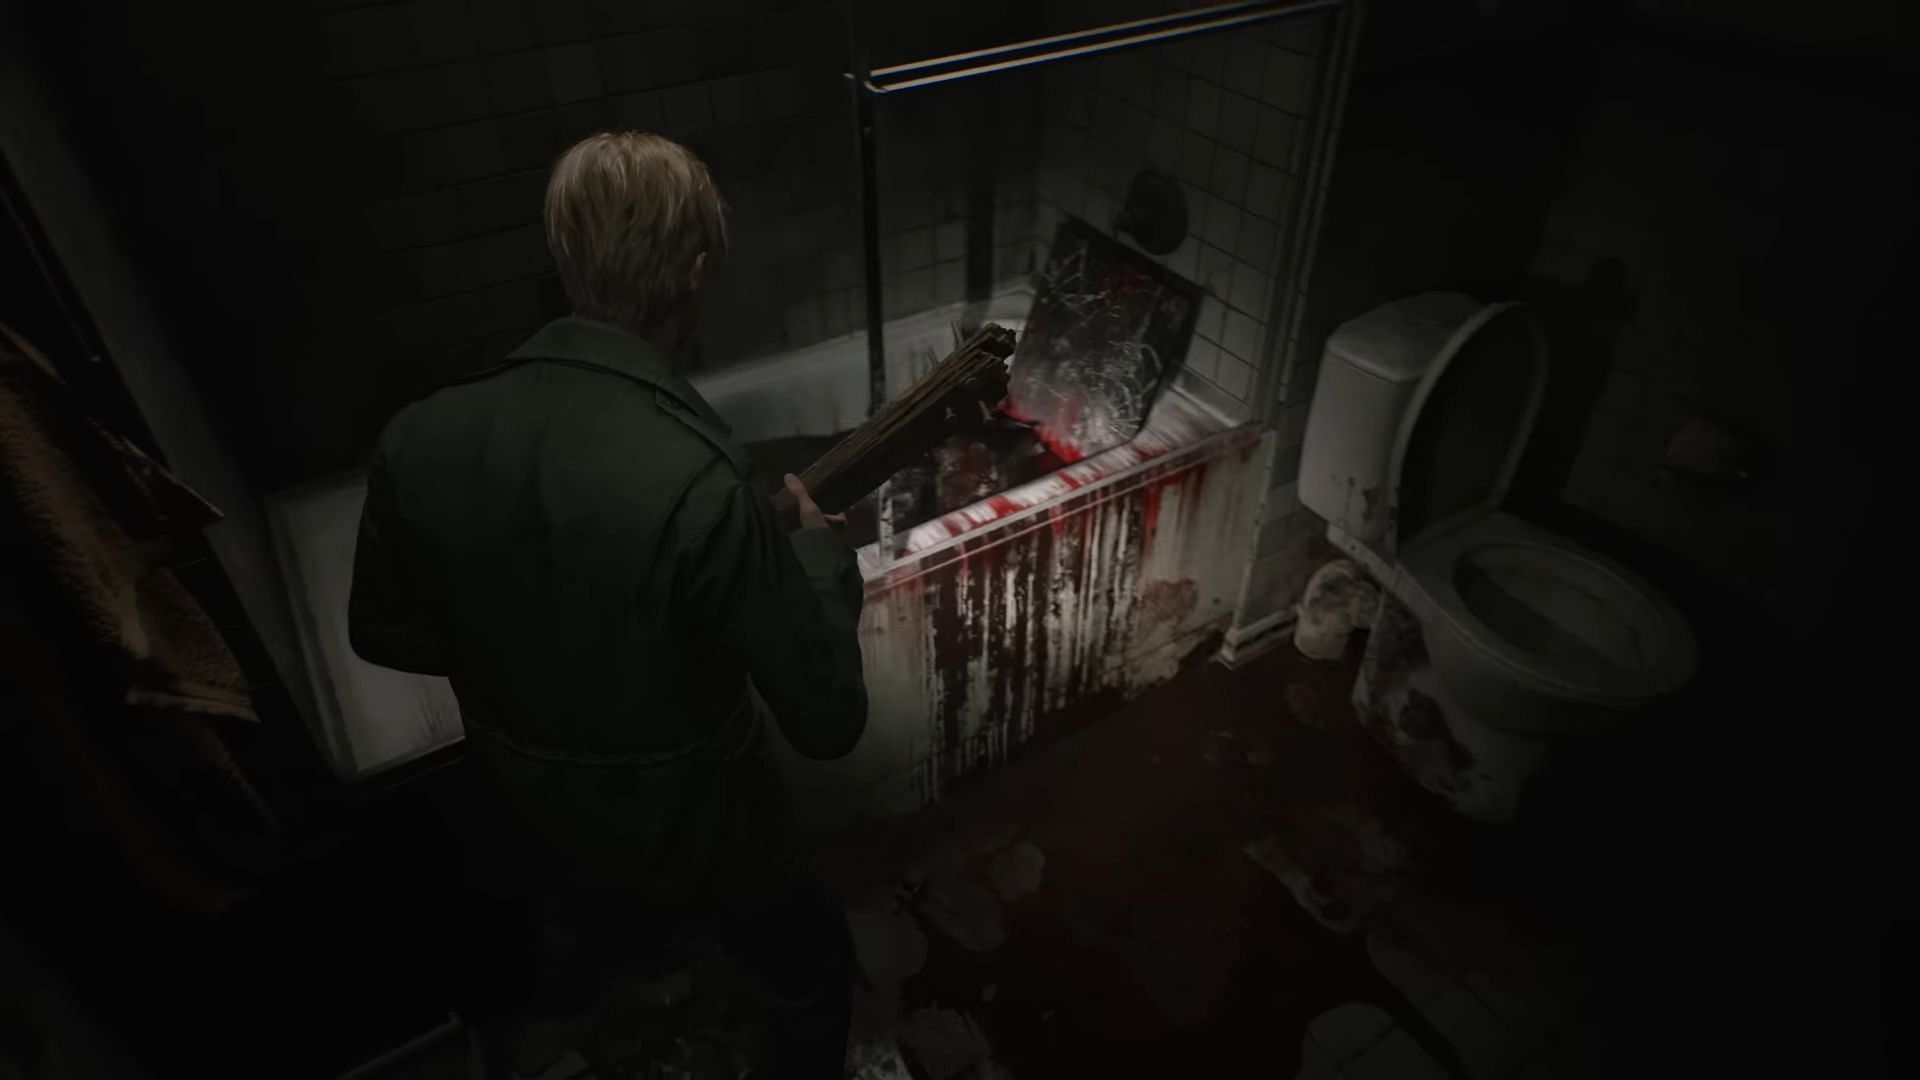 Silent Hill 2 is set to make a comeback this year (Image via Konami)